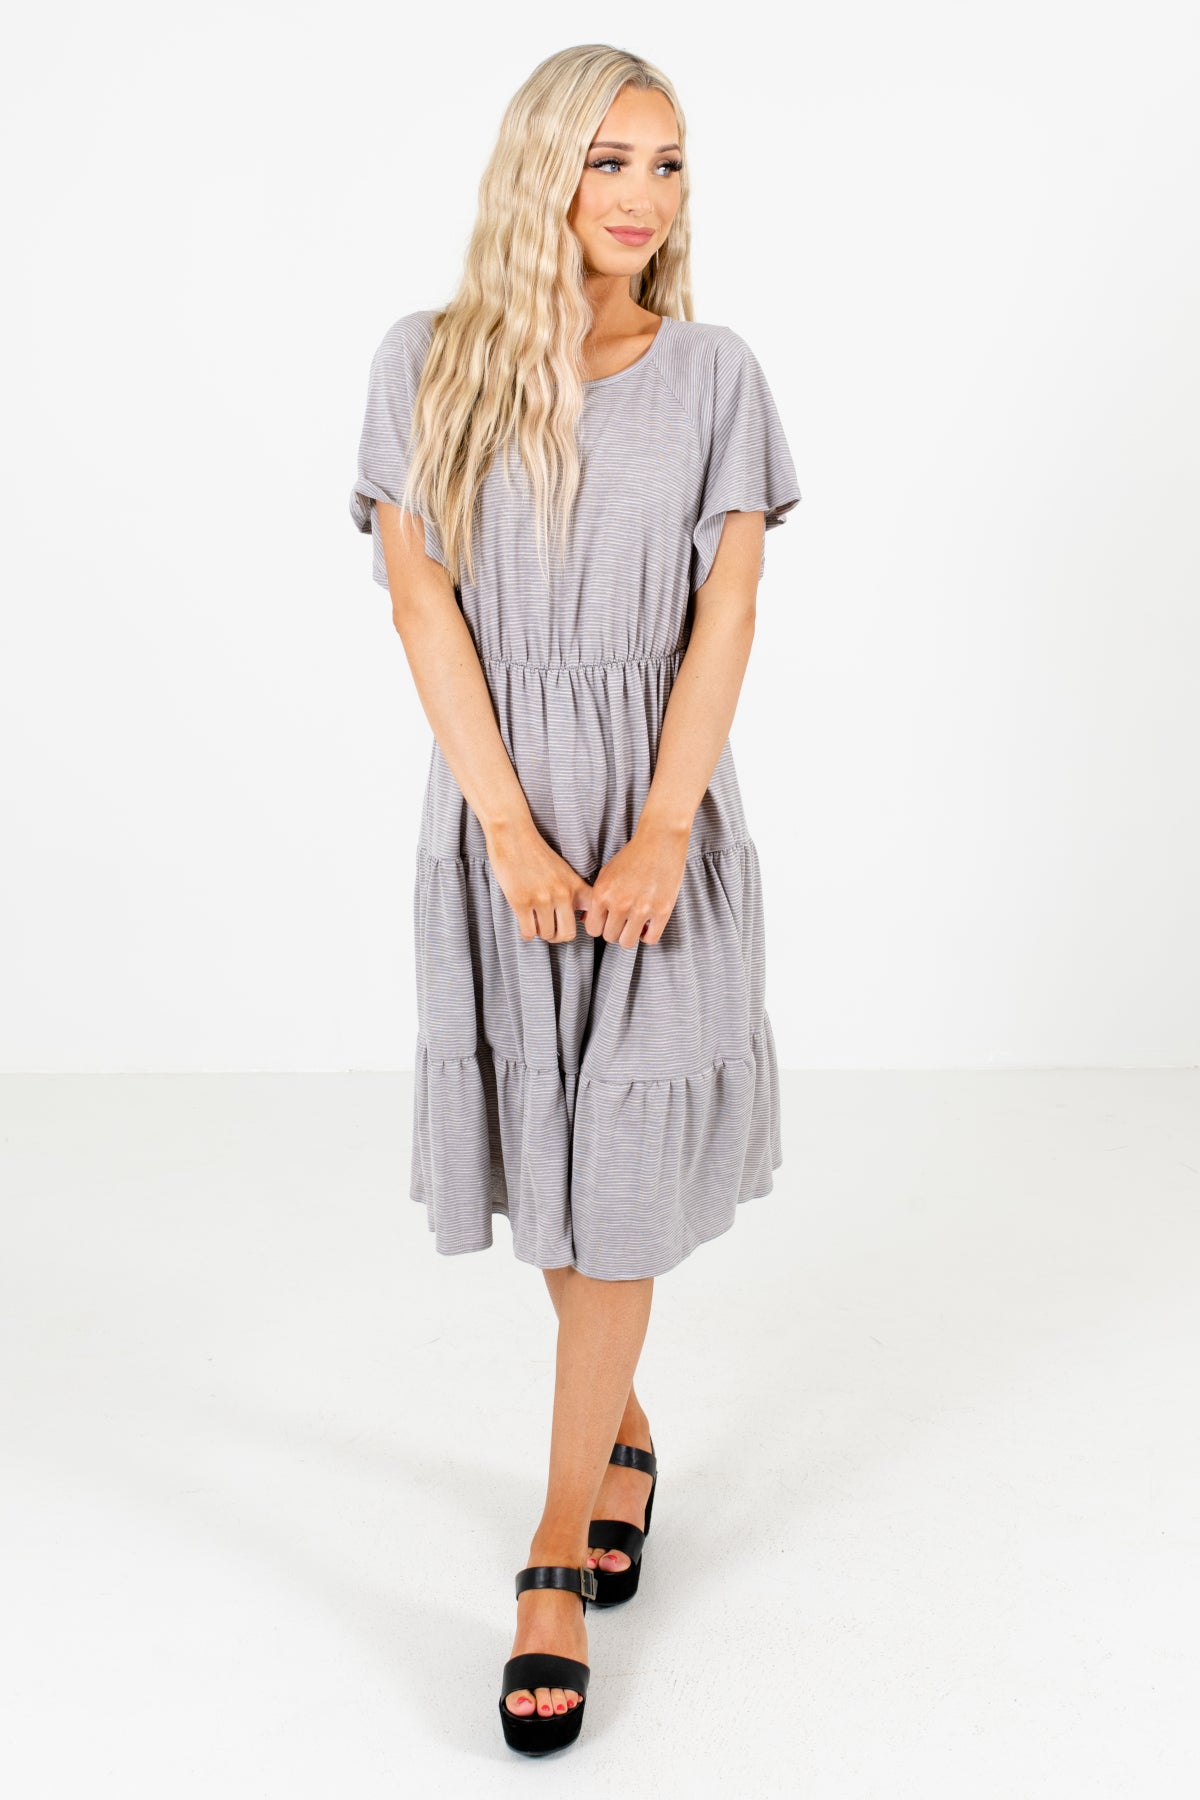 Gray Cute and Comfortable Boutique Knee-Length Dresses for Women